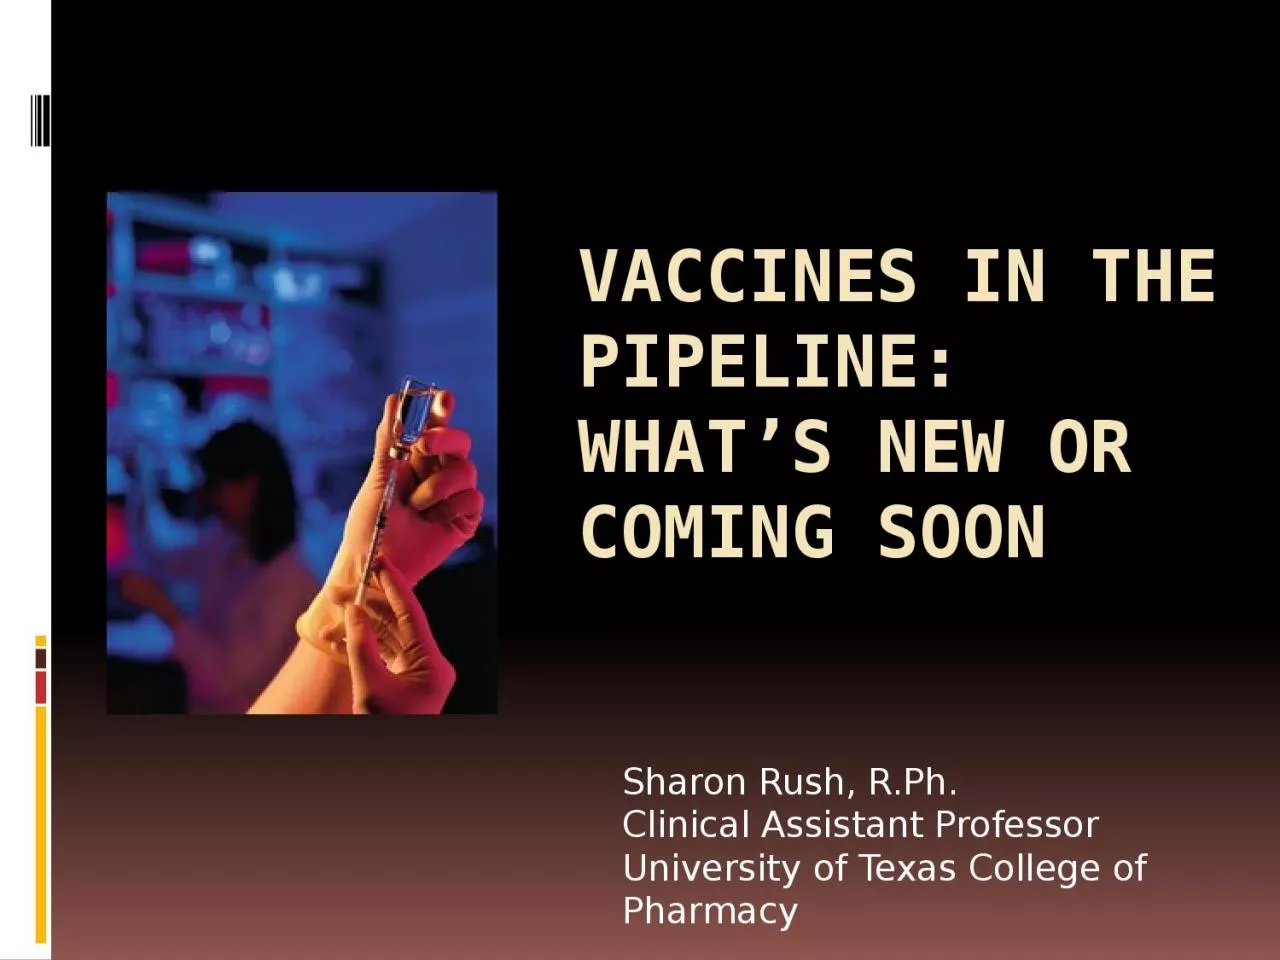 Vaccines in the Pipeline: